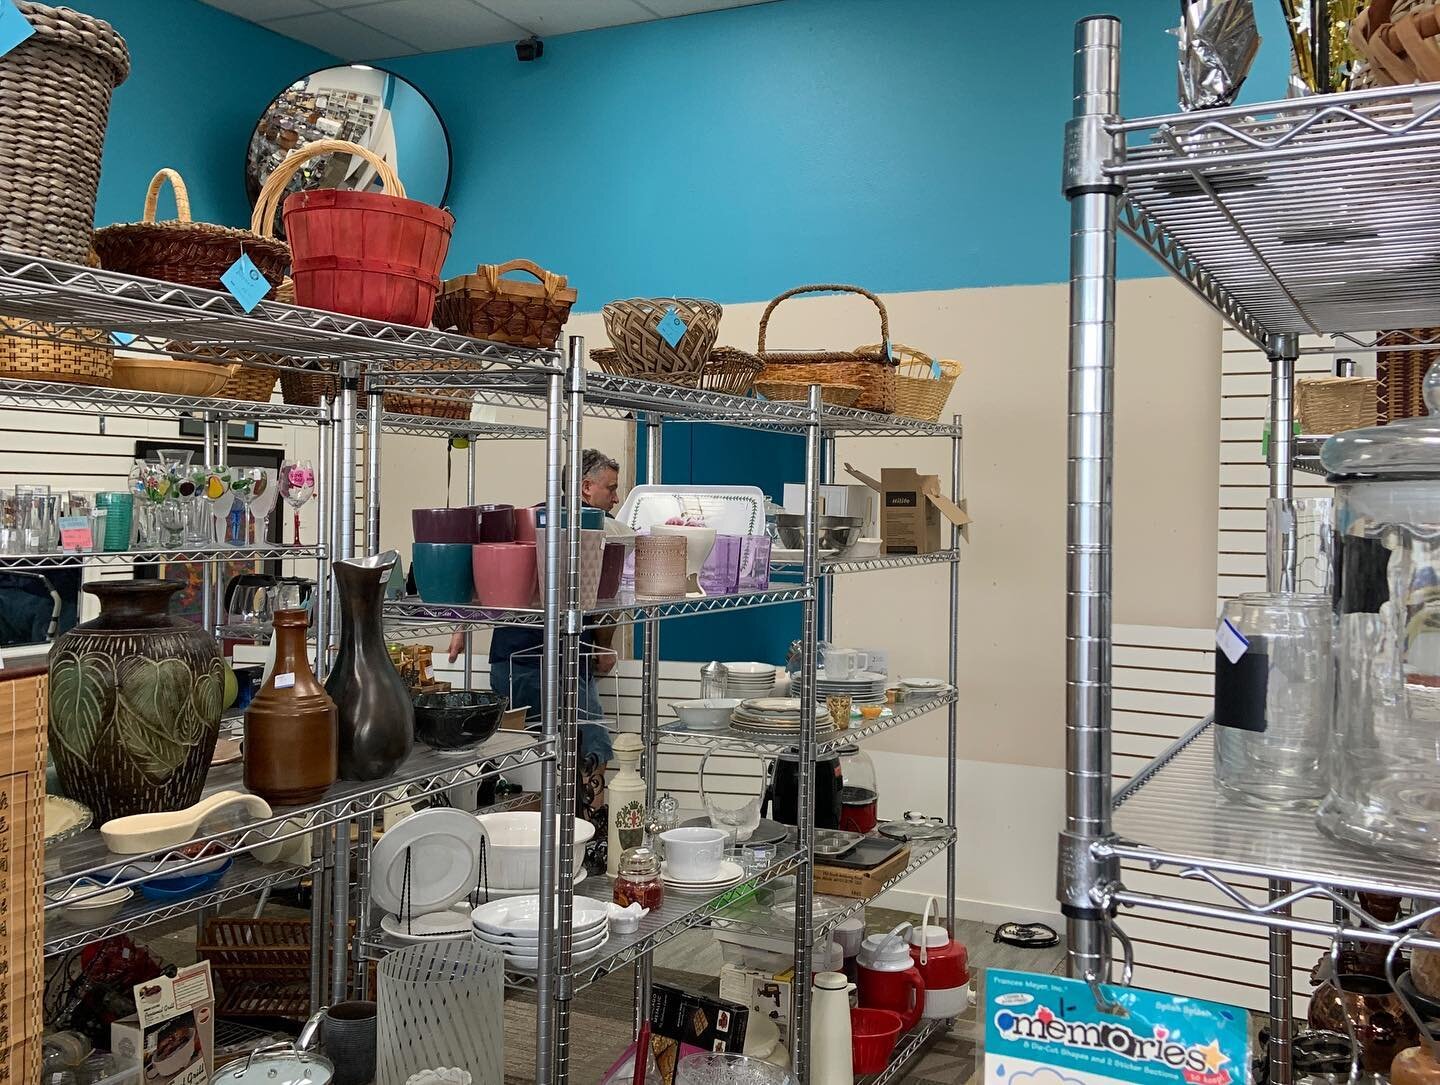 Our team of handy helpers stopped by this evening to prepare for the final stages of our store expansion happening tomorrow! Stay tuned for more updates!
This additional shopping space, once a backroom storage area, has been transformed by our volunt